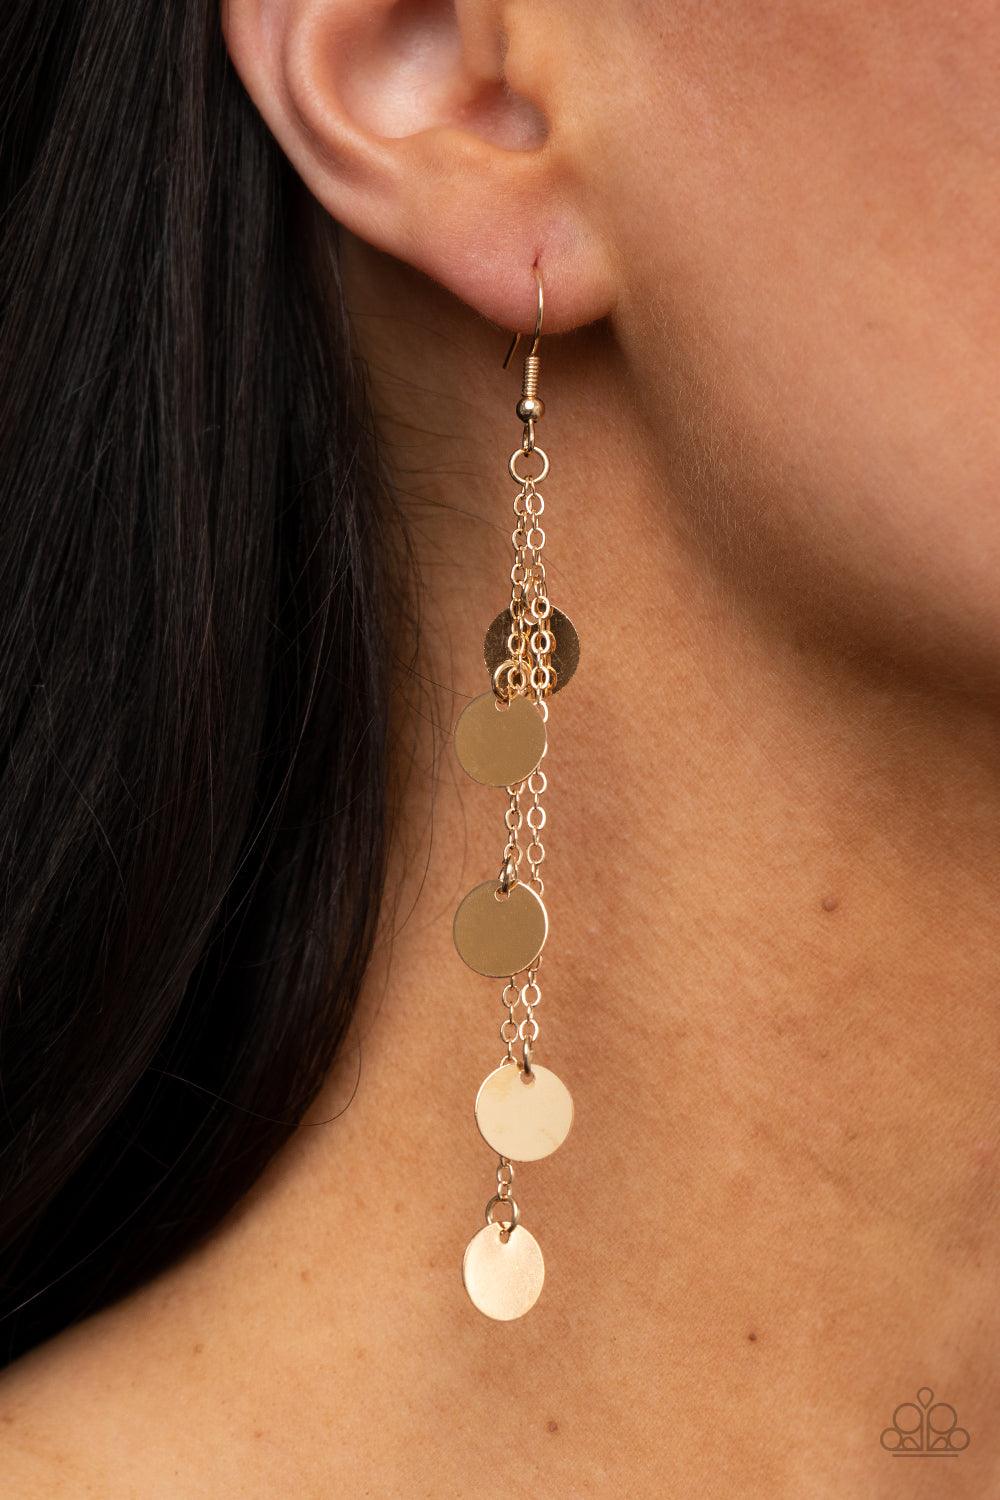 Paparazzi Accessories Take A Good Look - Gold Dainty gold discs haphazardly swing from two dainty gold chains, coalescing into a noisemaking shimmer. Earring attaches to a standard fishhook fitting. Sold as one pair of earrings. Earrings